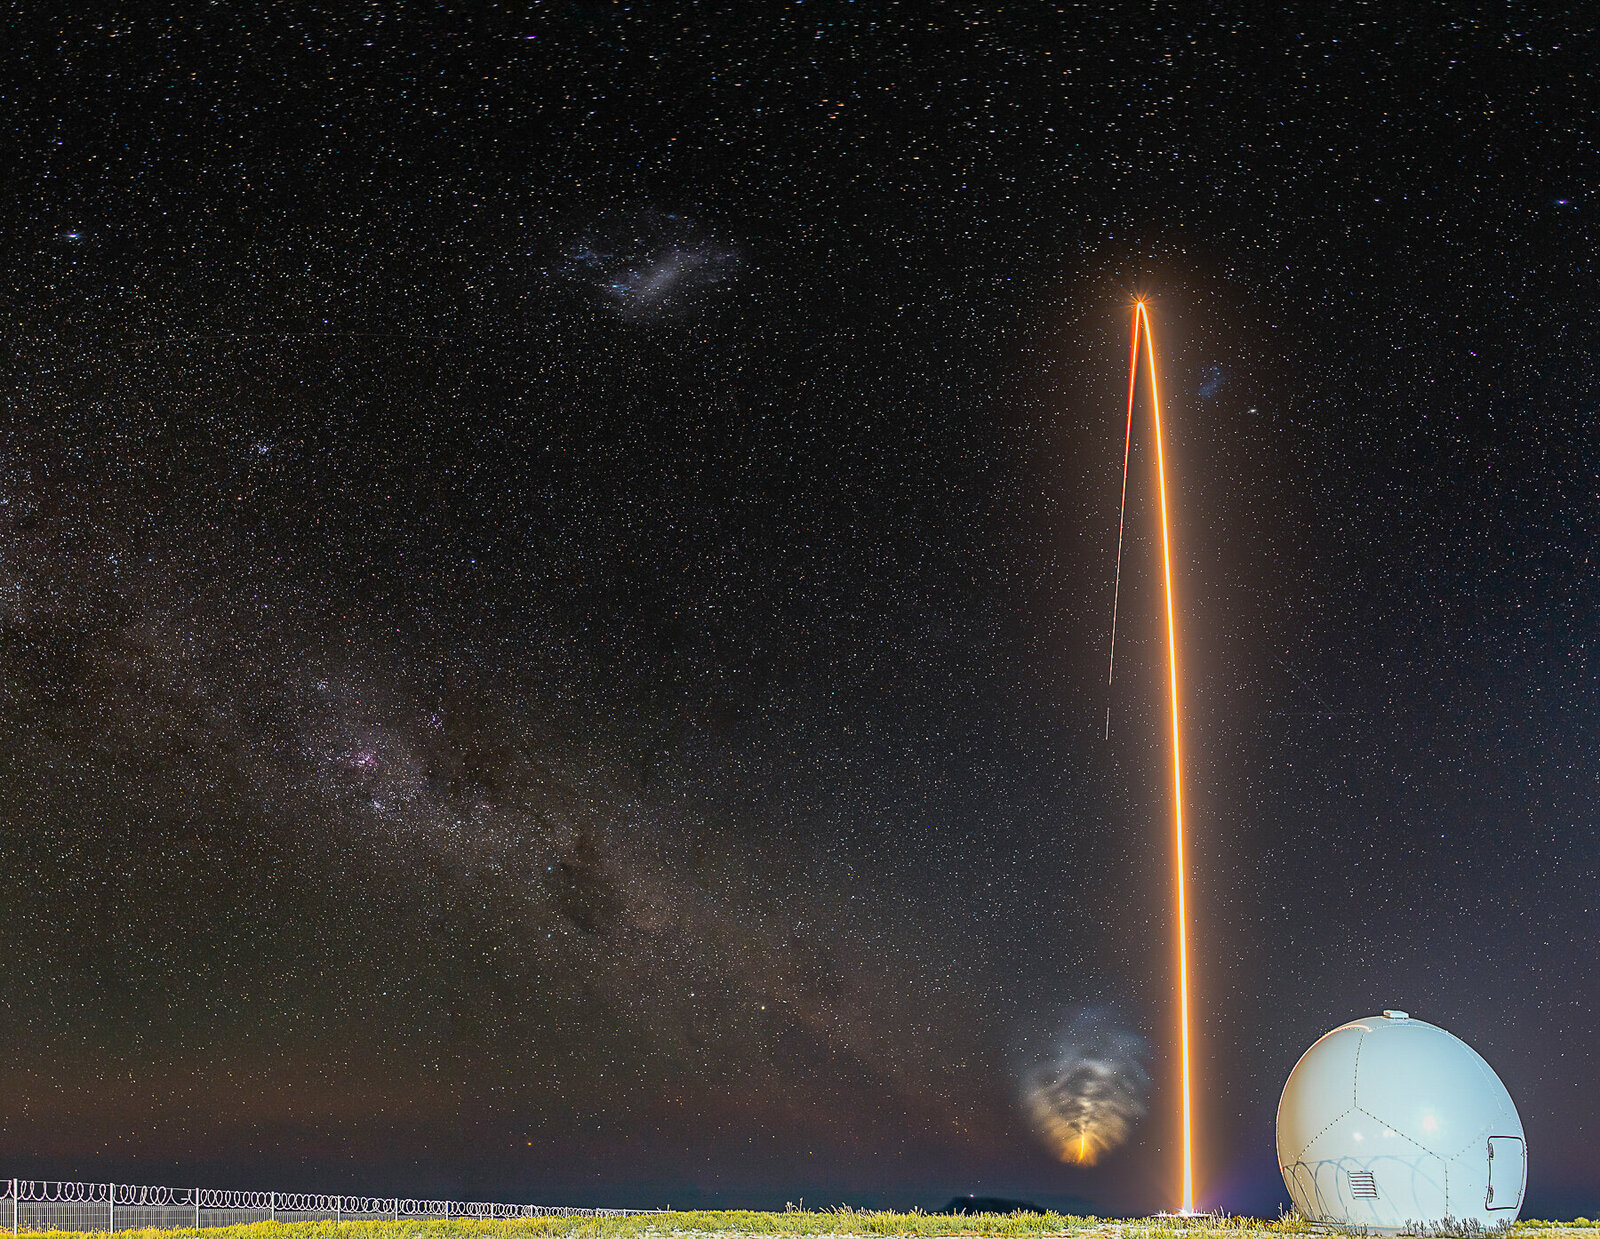 Rocket Lab's Electron rocket launch. Streak long exposure with starry sky background. Radar dome in foreground.